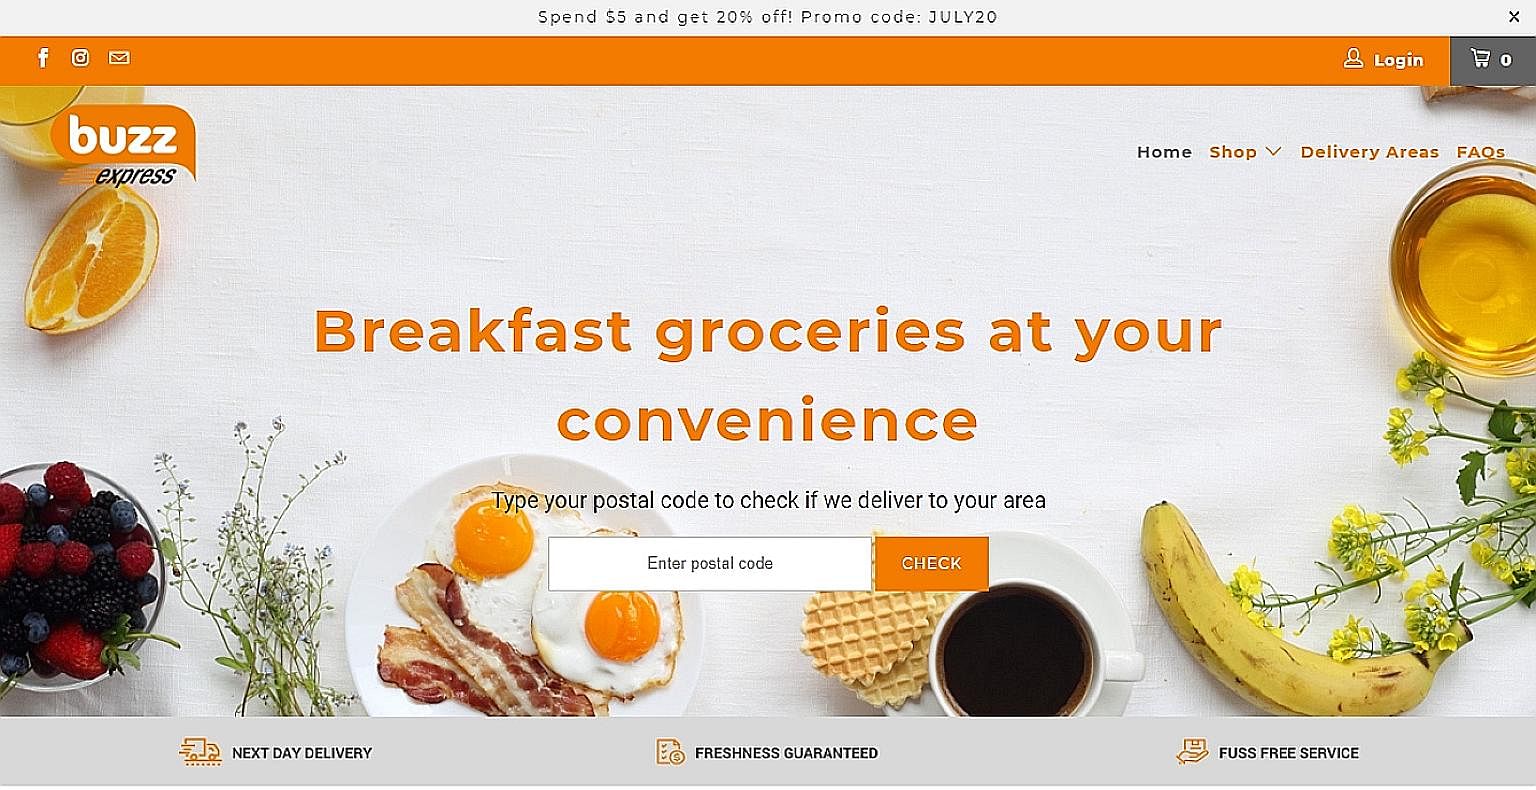 From Aug 5, people in the newly covered areas can place breakfast orders online for them to be delivered the next day.